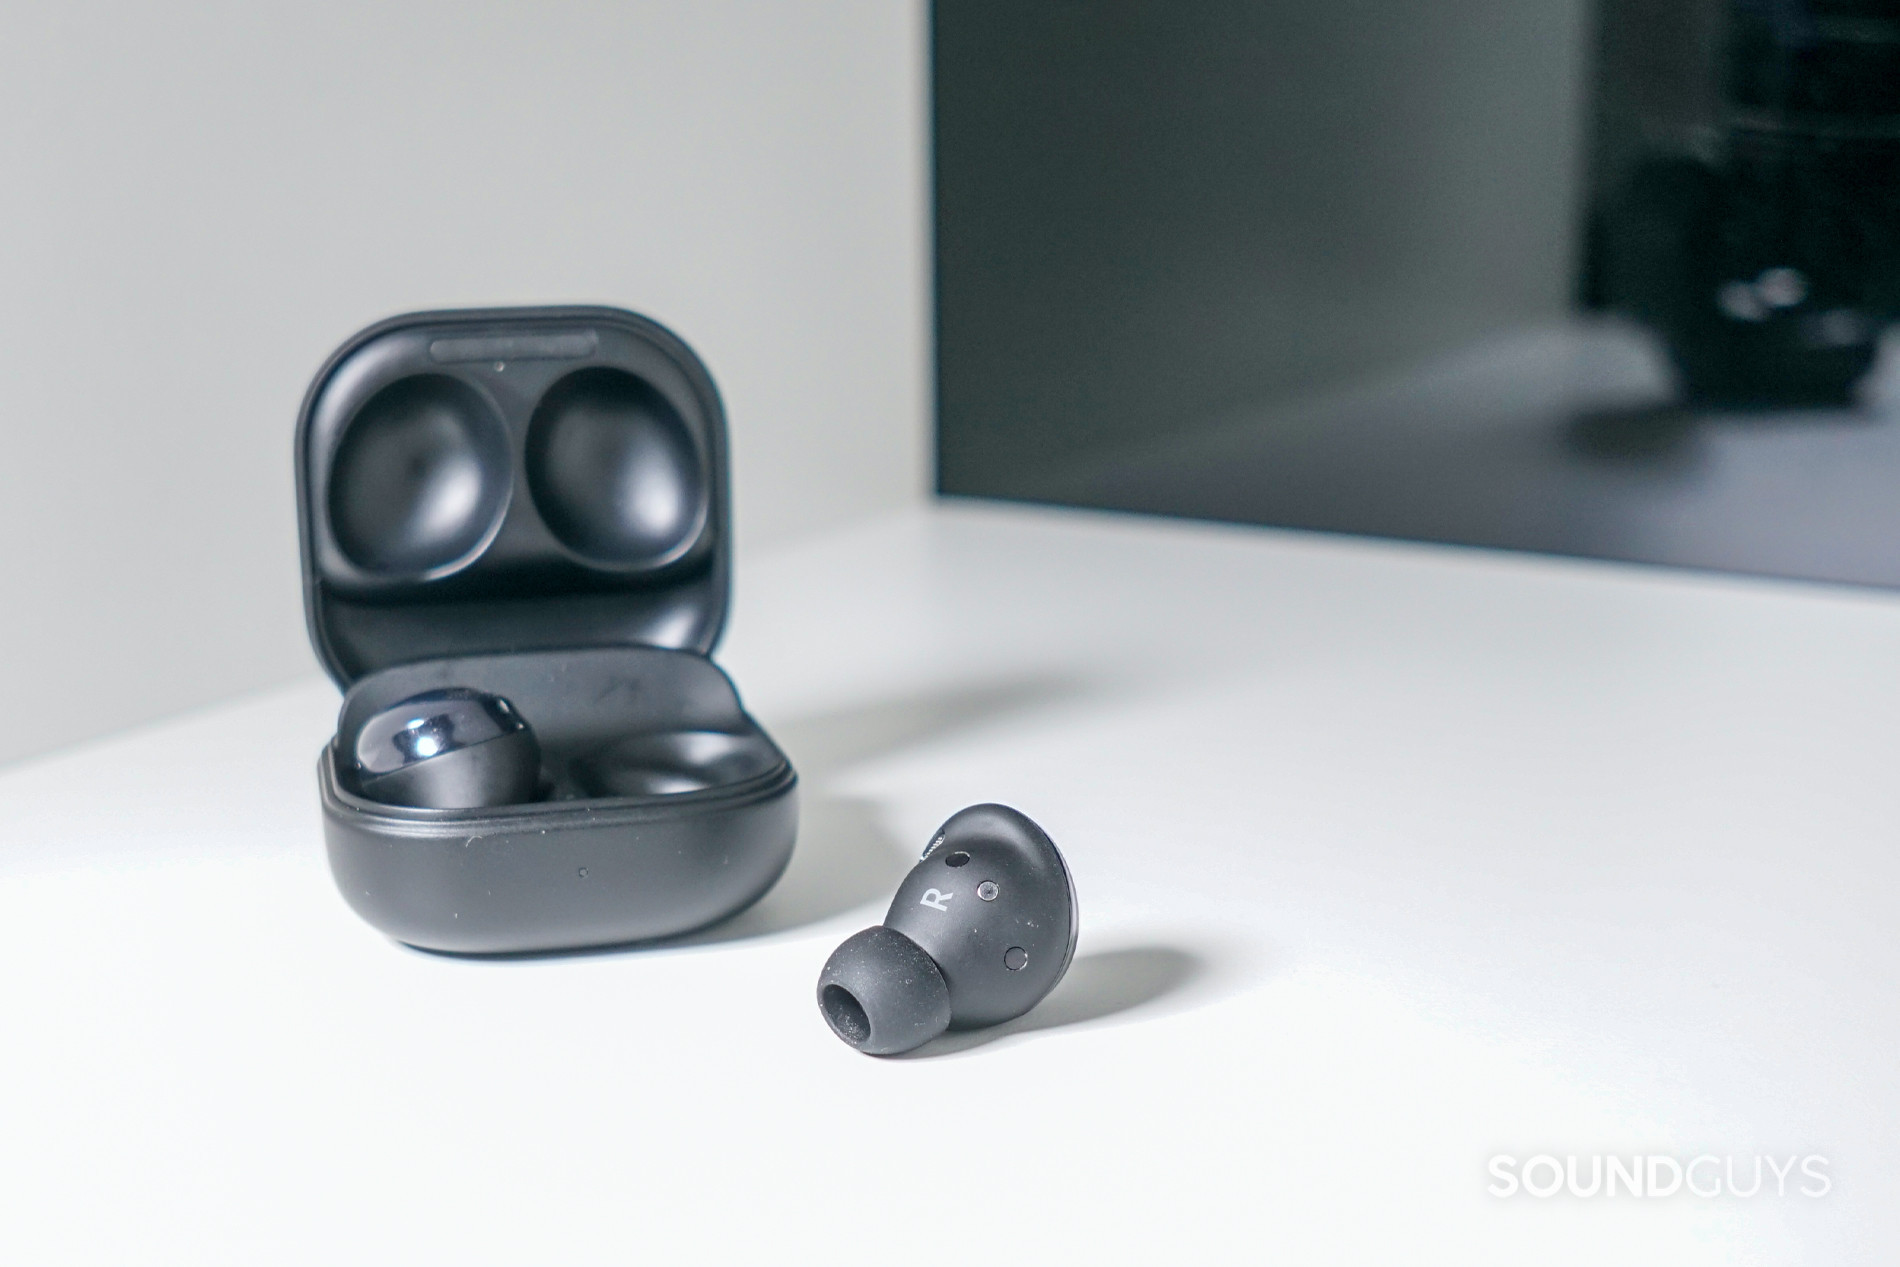 The Samsung Galaxy Buds Pro true Wireless earbuds sit on a white shelf in front of a reflective black surface, with one earbud in the case.